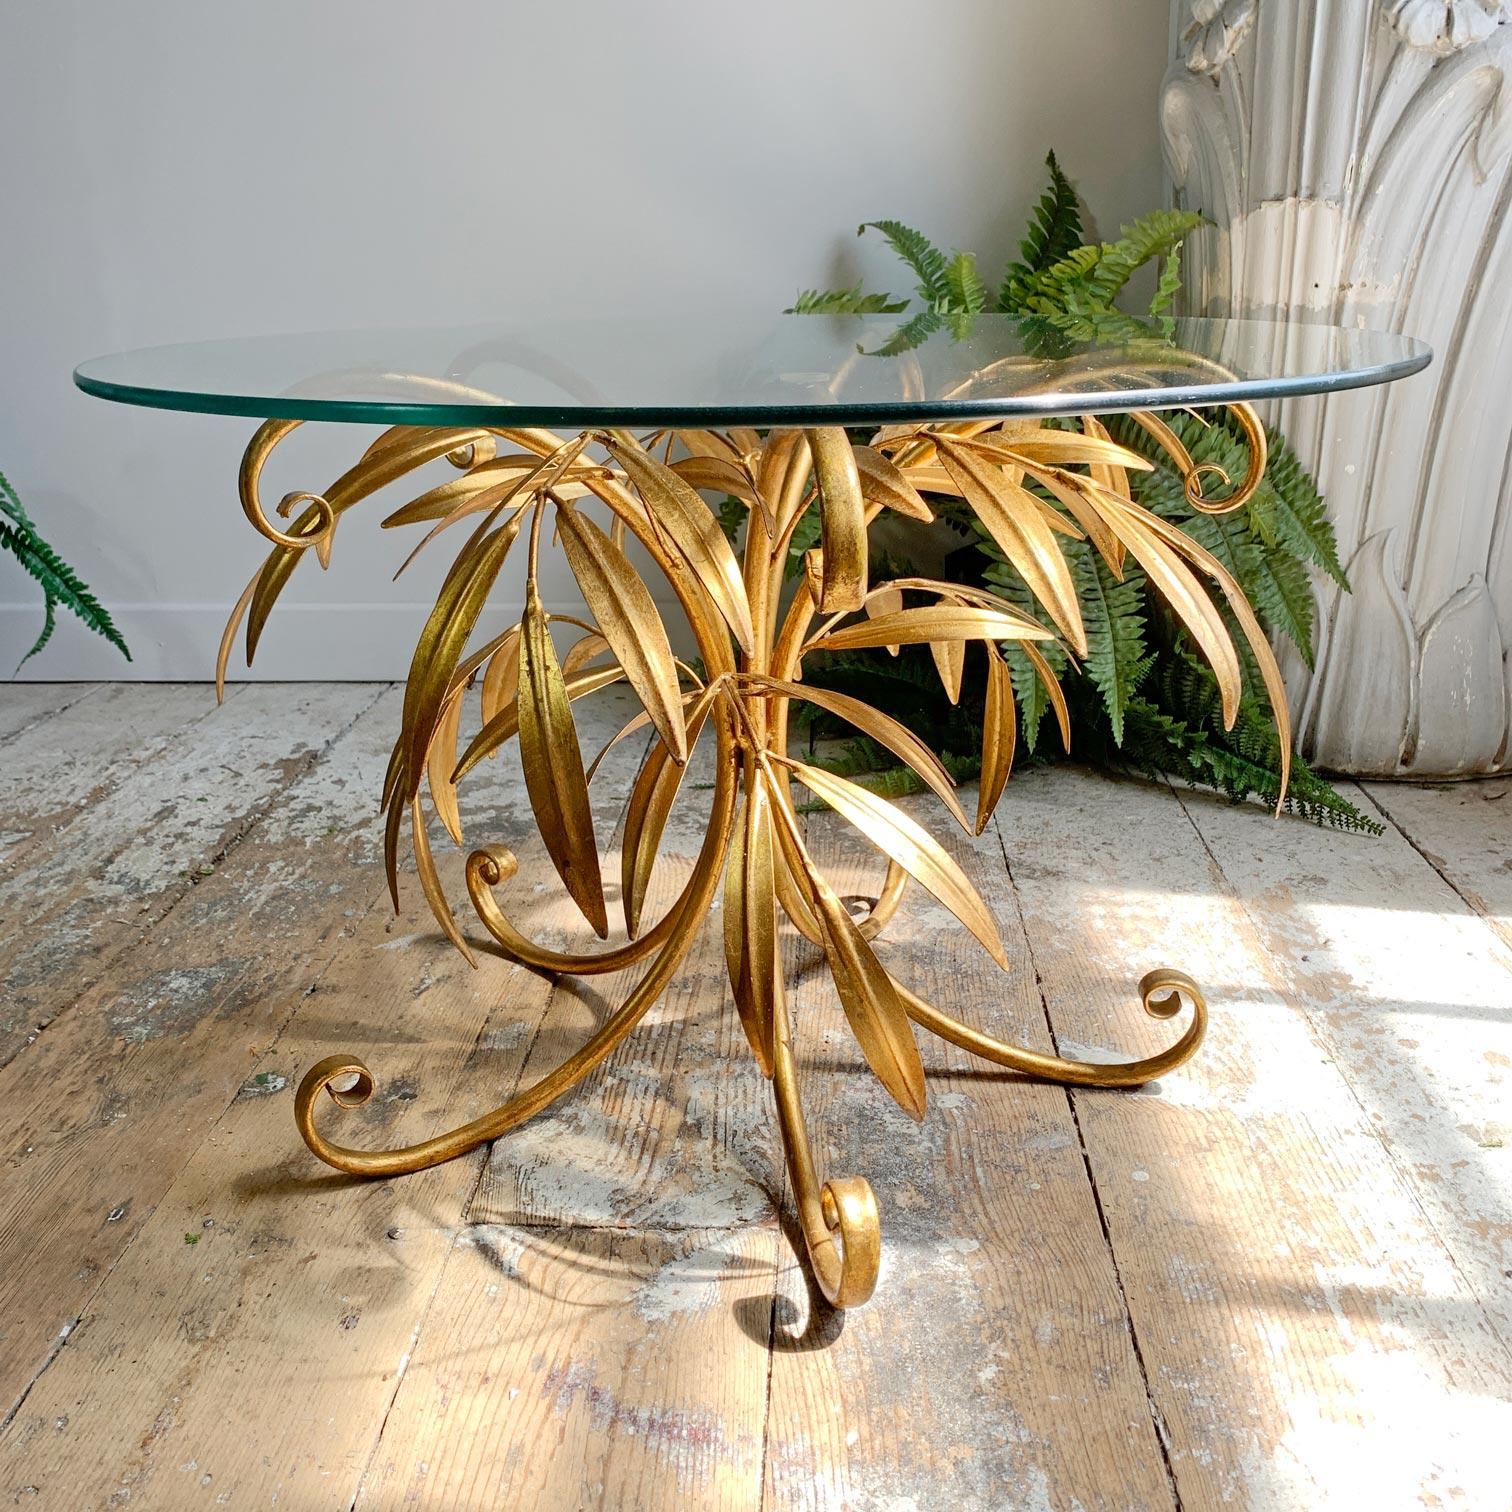 Glorious 1950’s Italian coffee or centre table, profuse with gilt leaves and branches, the original metal tag of Italian authenticity is still present. One small leaf has been lost, this is very hard to notice, but mentioned for total